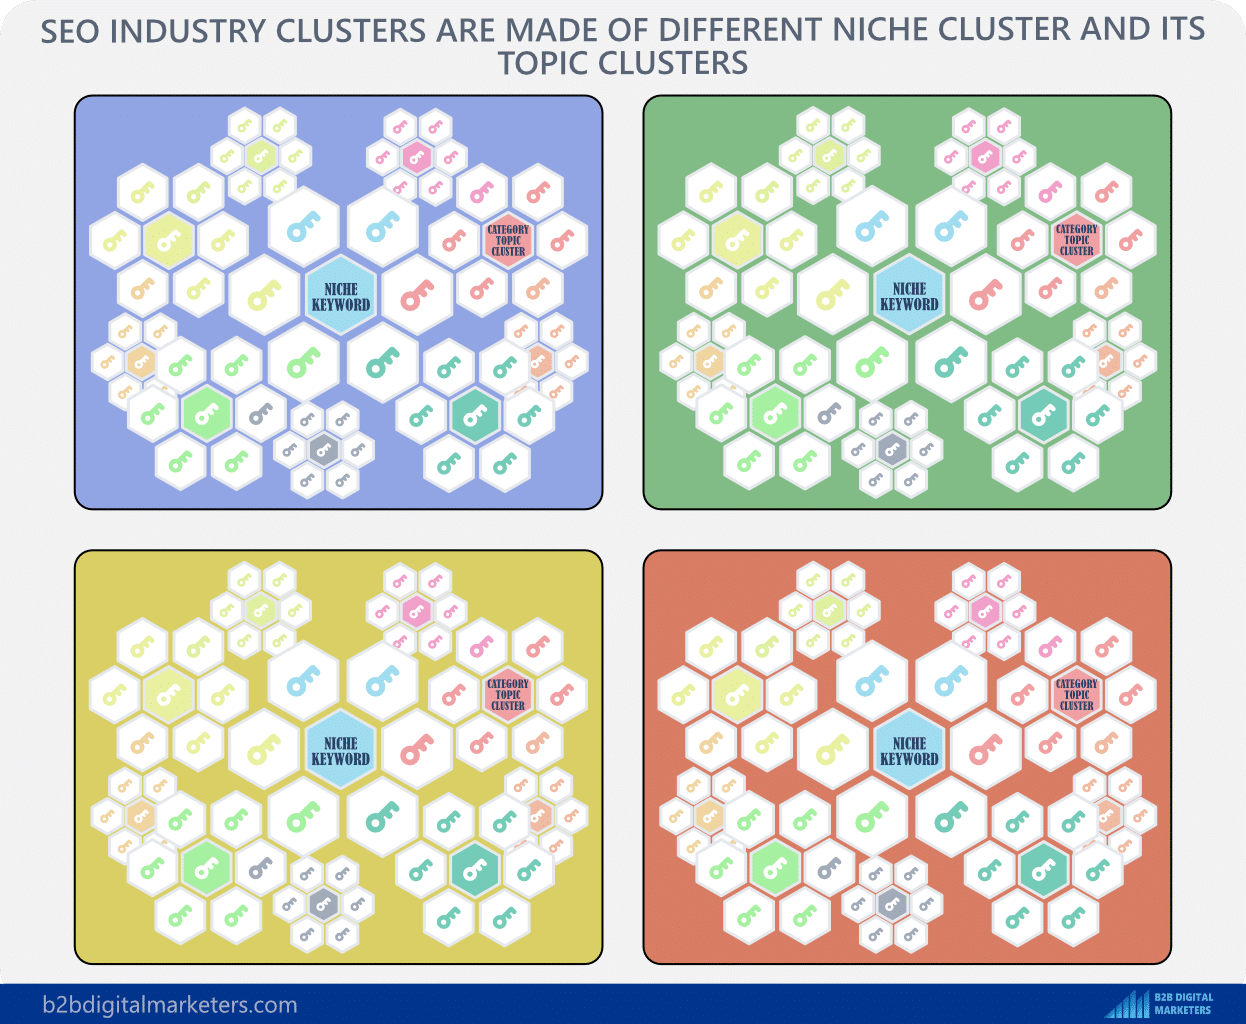 creating industry cluster from niche and topic clusters by collecting relevant b2b keywords